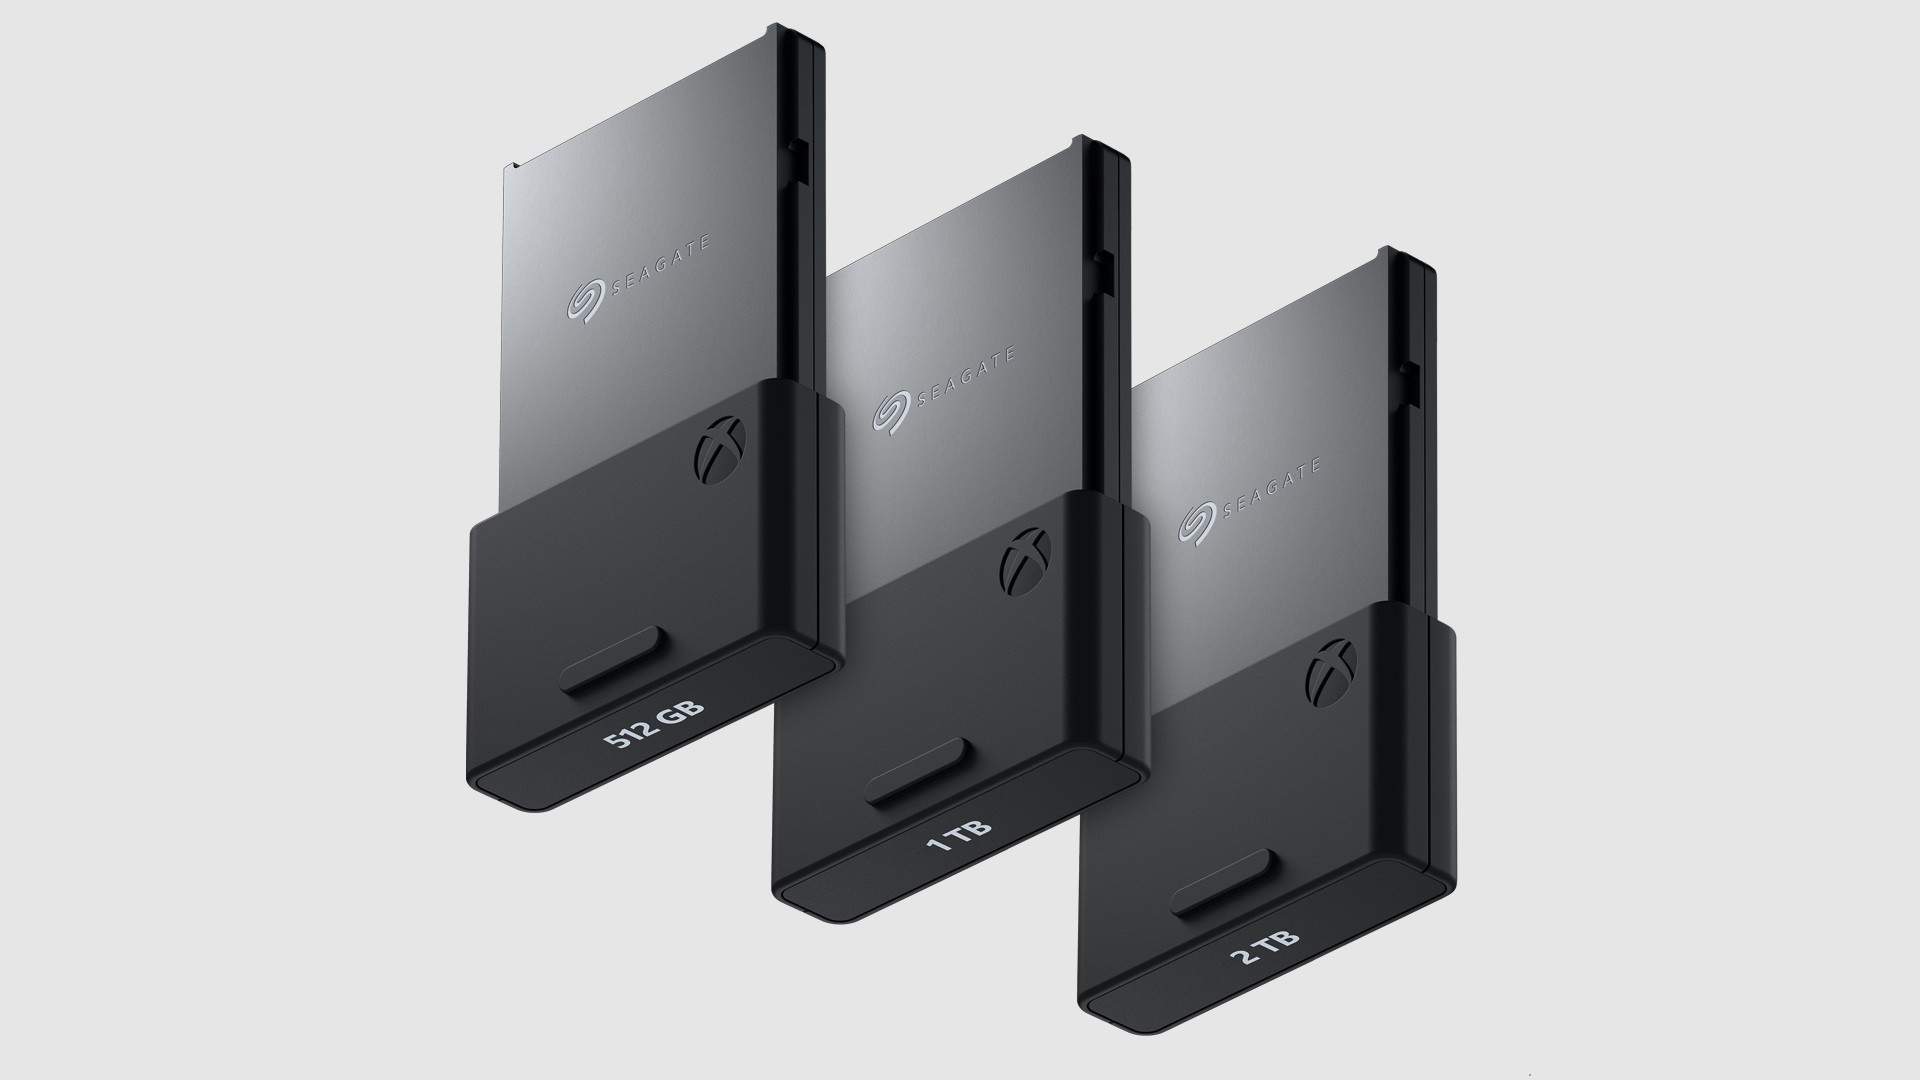 Seagate Storage Expansion Cards - 512GB, 1TB, and 2TB models displayed in order of size